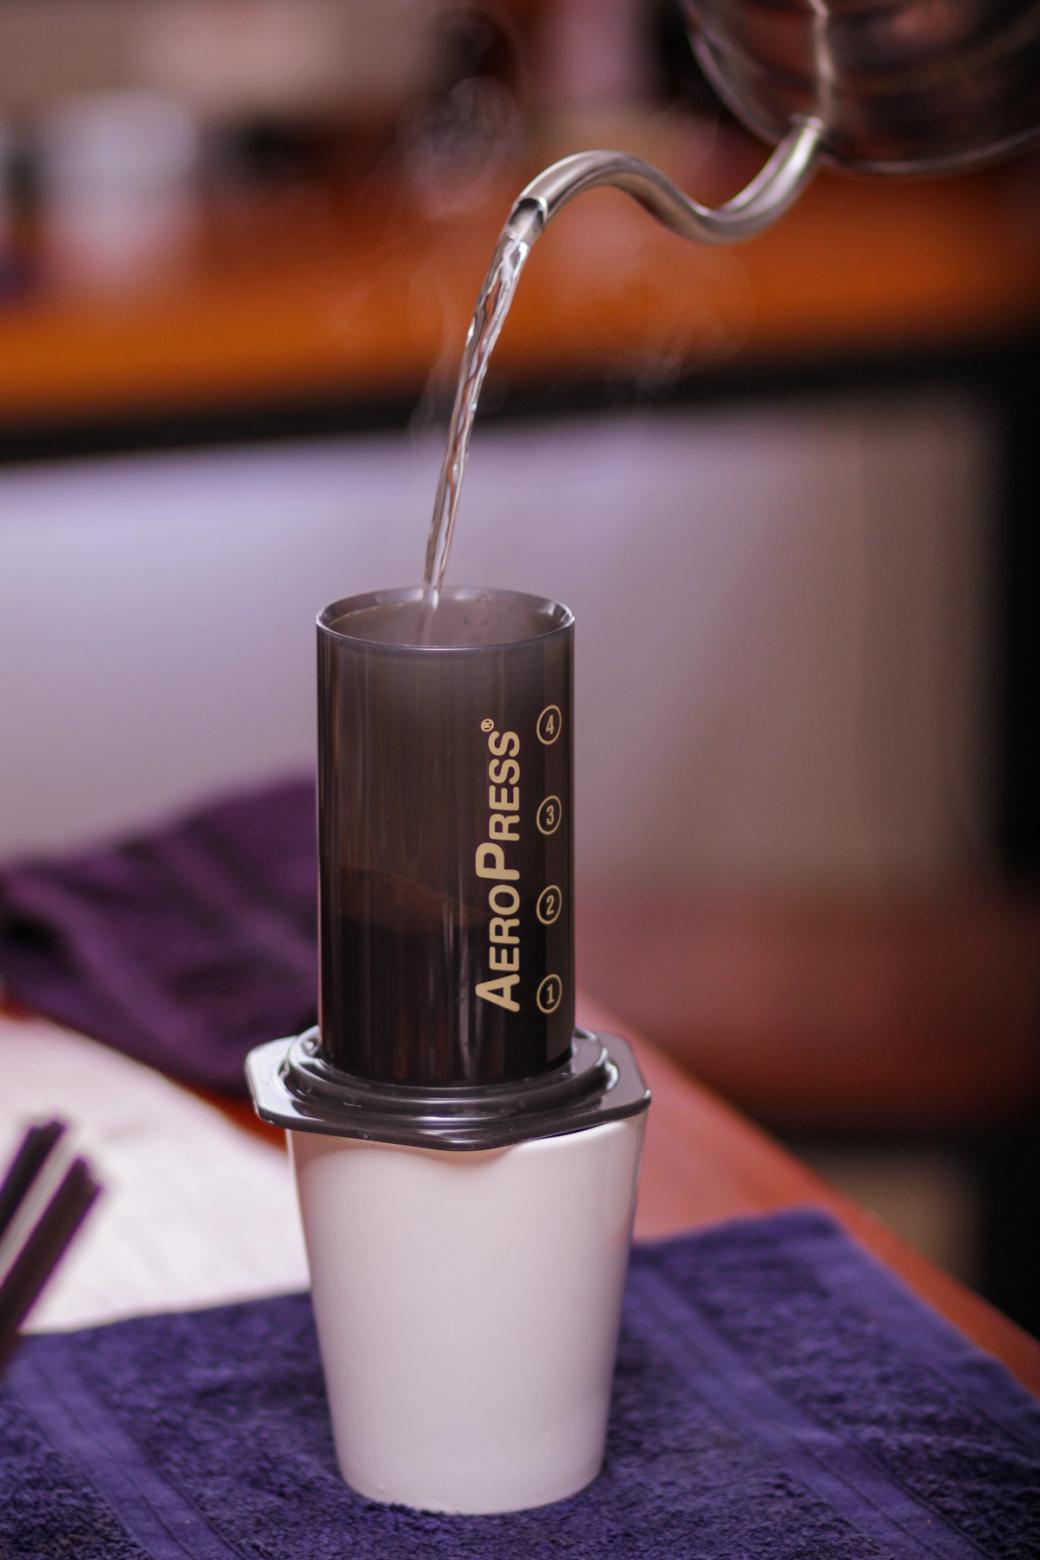 Pouring Water into AeroPress